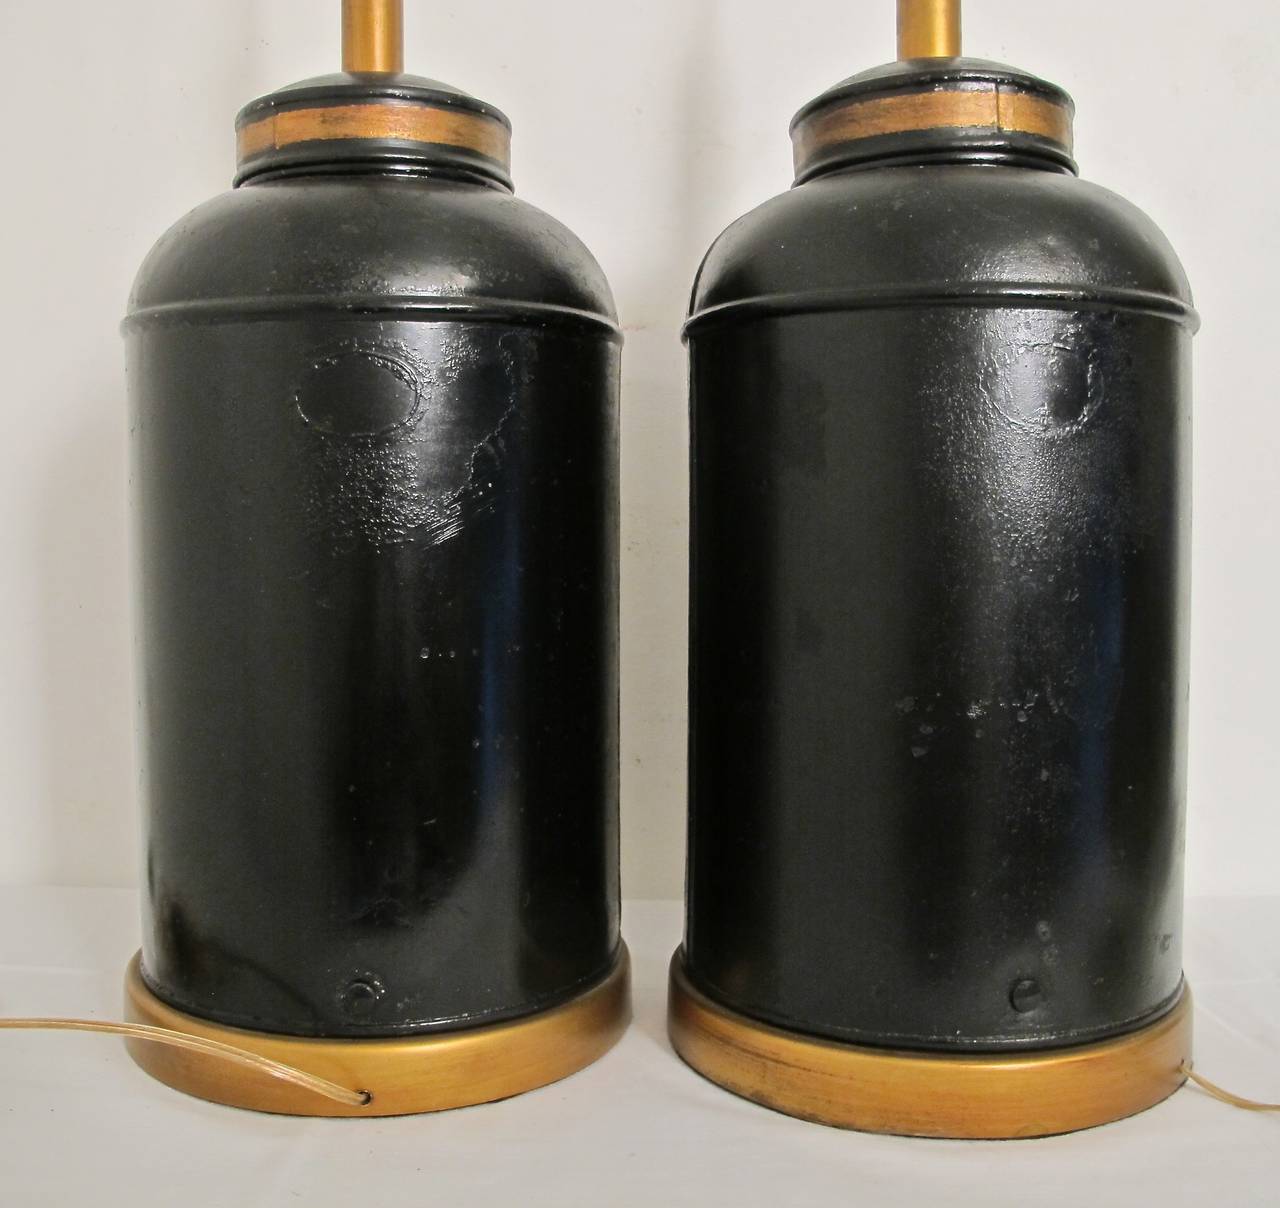 English Antique Painted Tea Canister Lamps, England 19th Century